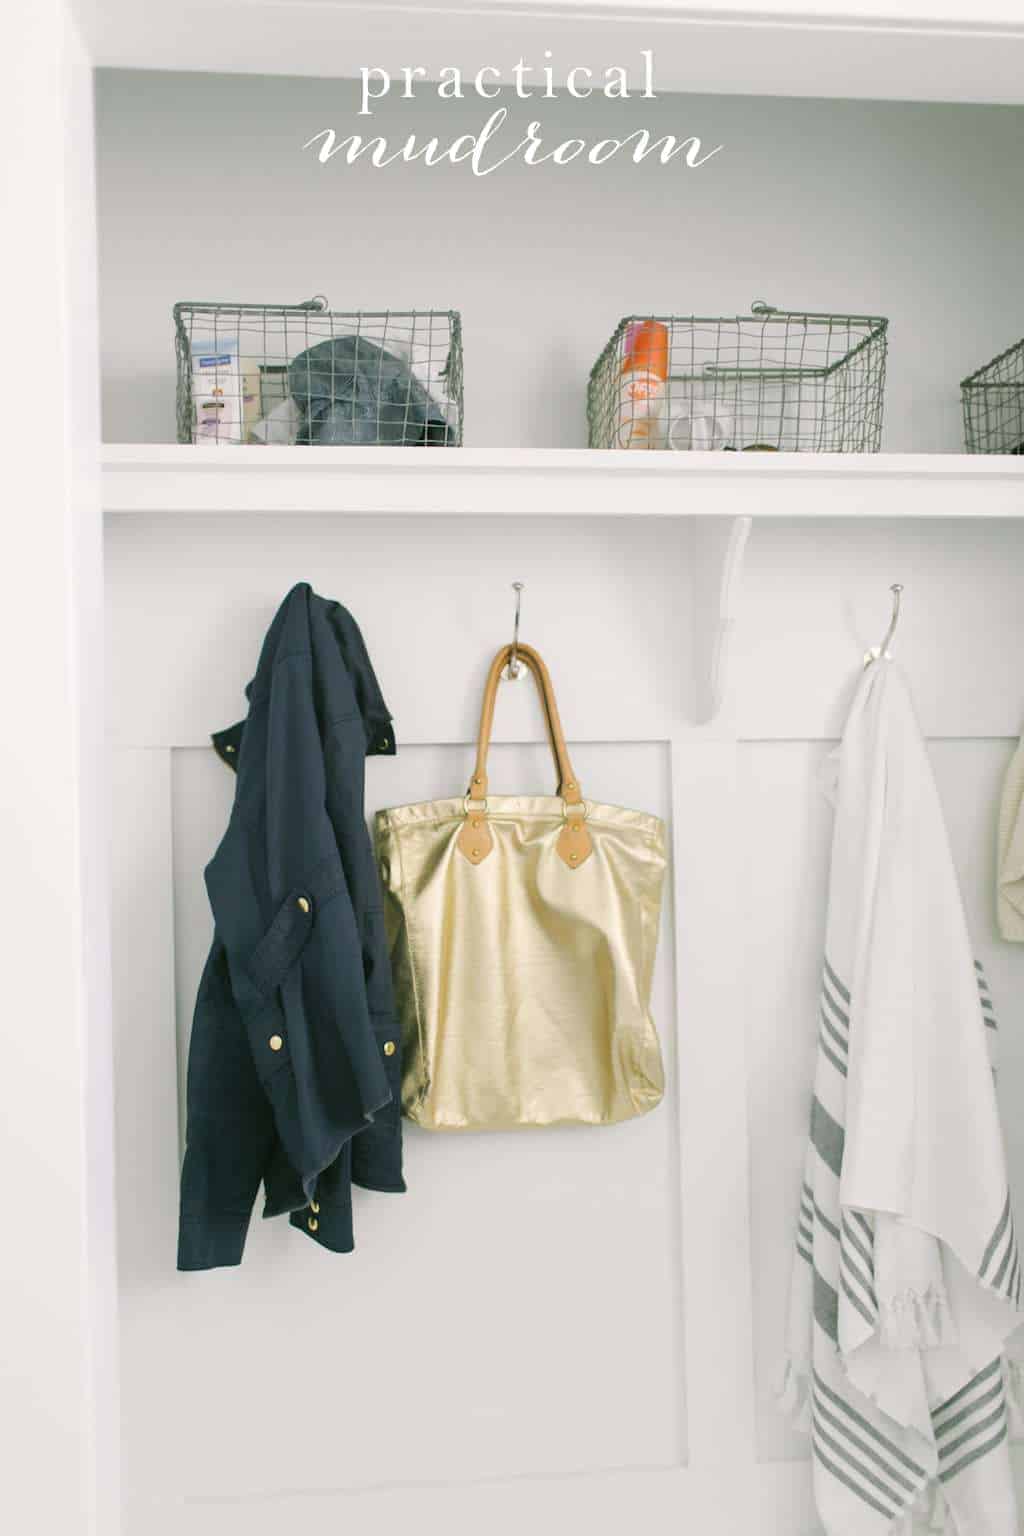 A mudroom with baskets and coats hanging from farmhouse hooks.